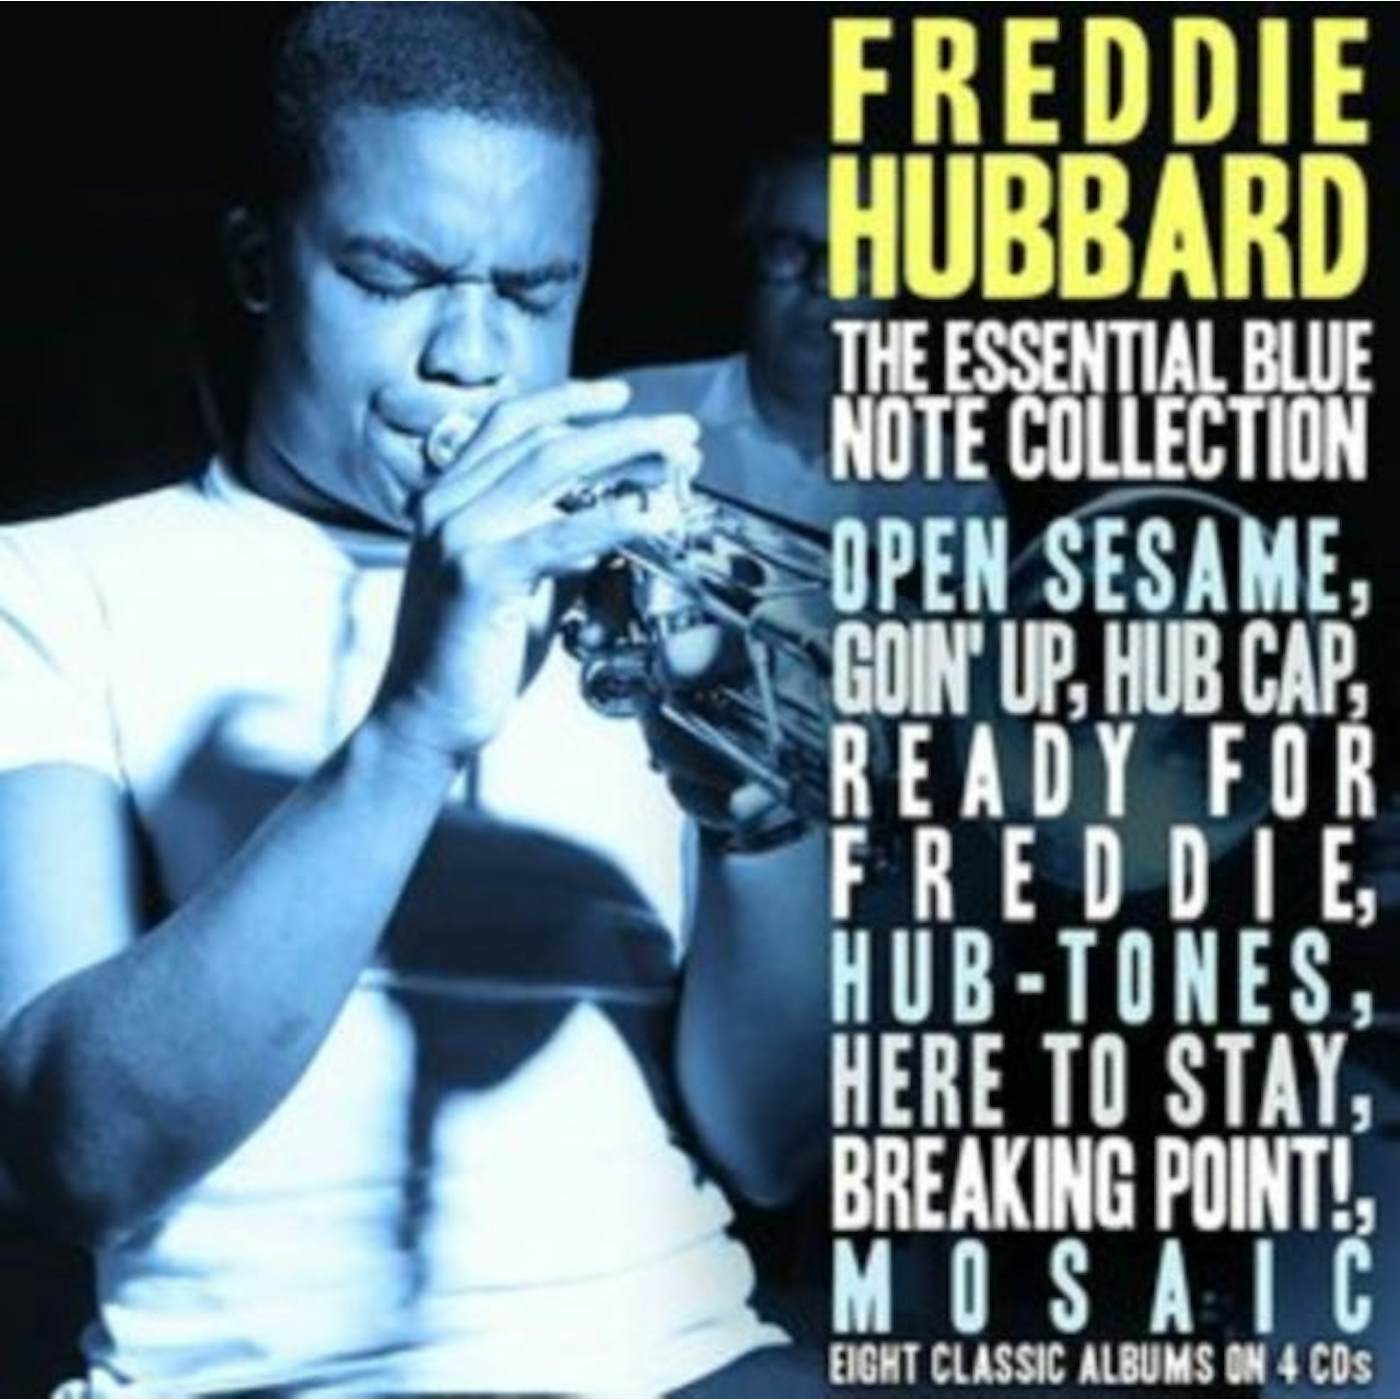 Freddie Hubbard CD - The Essential Blue Note Collection (4cd)